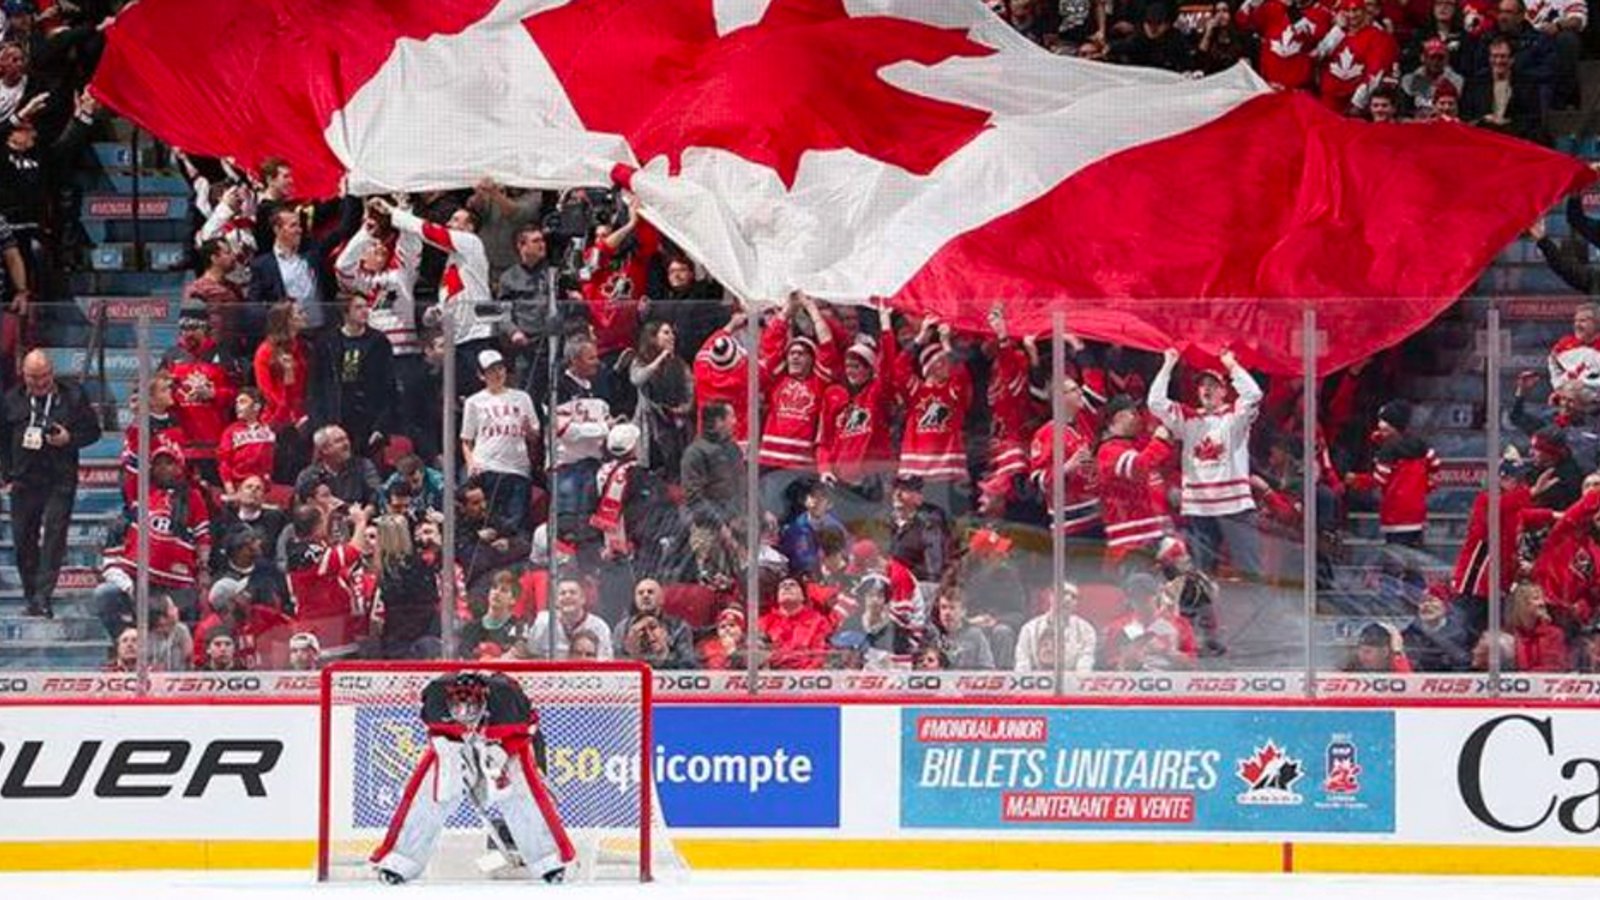 Canada suffers another blow due to restrictions, NHL draft prospect showcase headed to USA